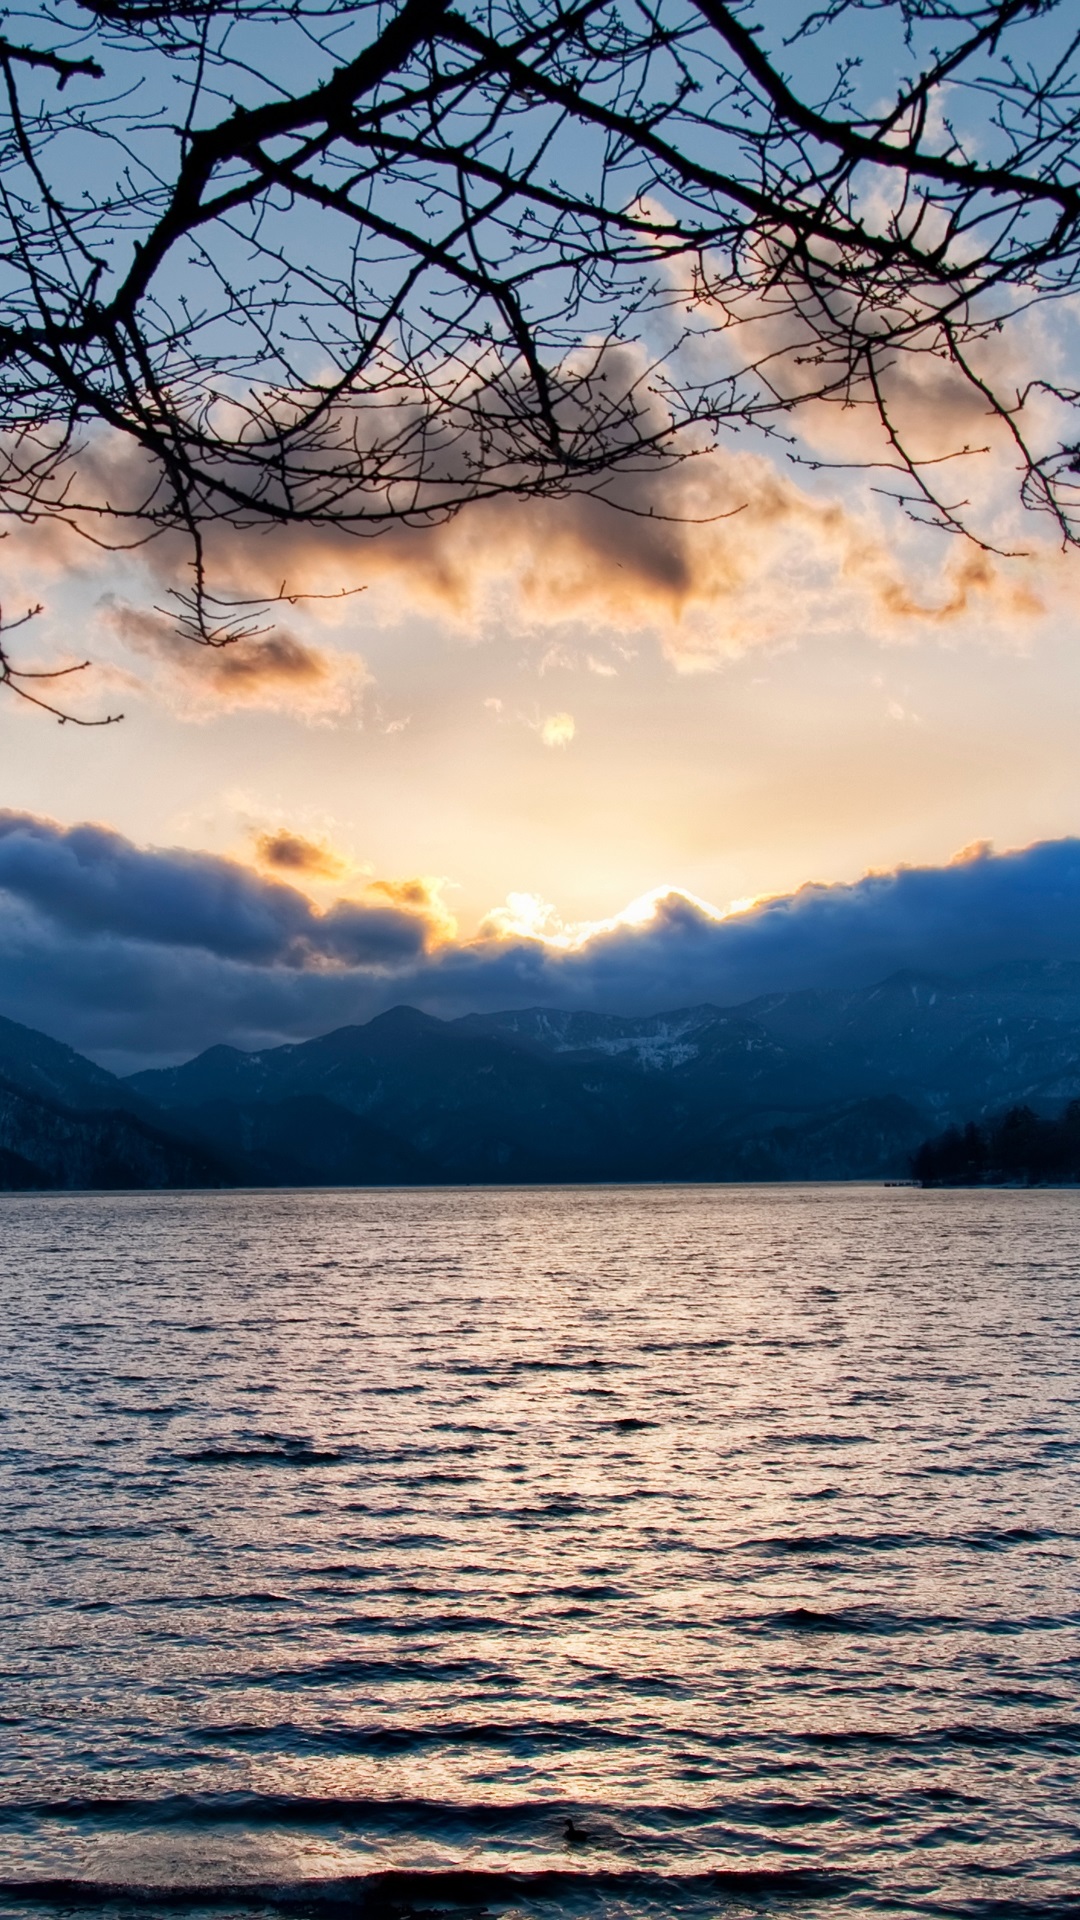 Lake, clouds, mountains, twigs, sunset iPhone X 3GS wallpaper download